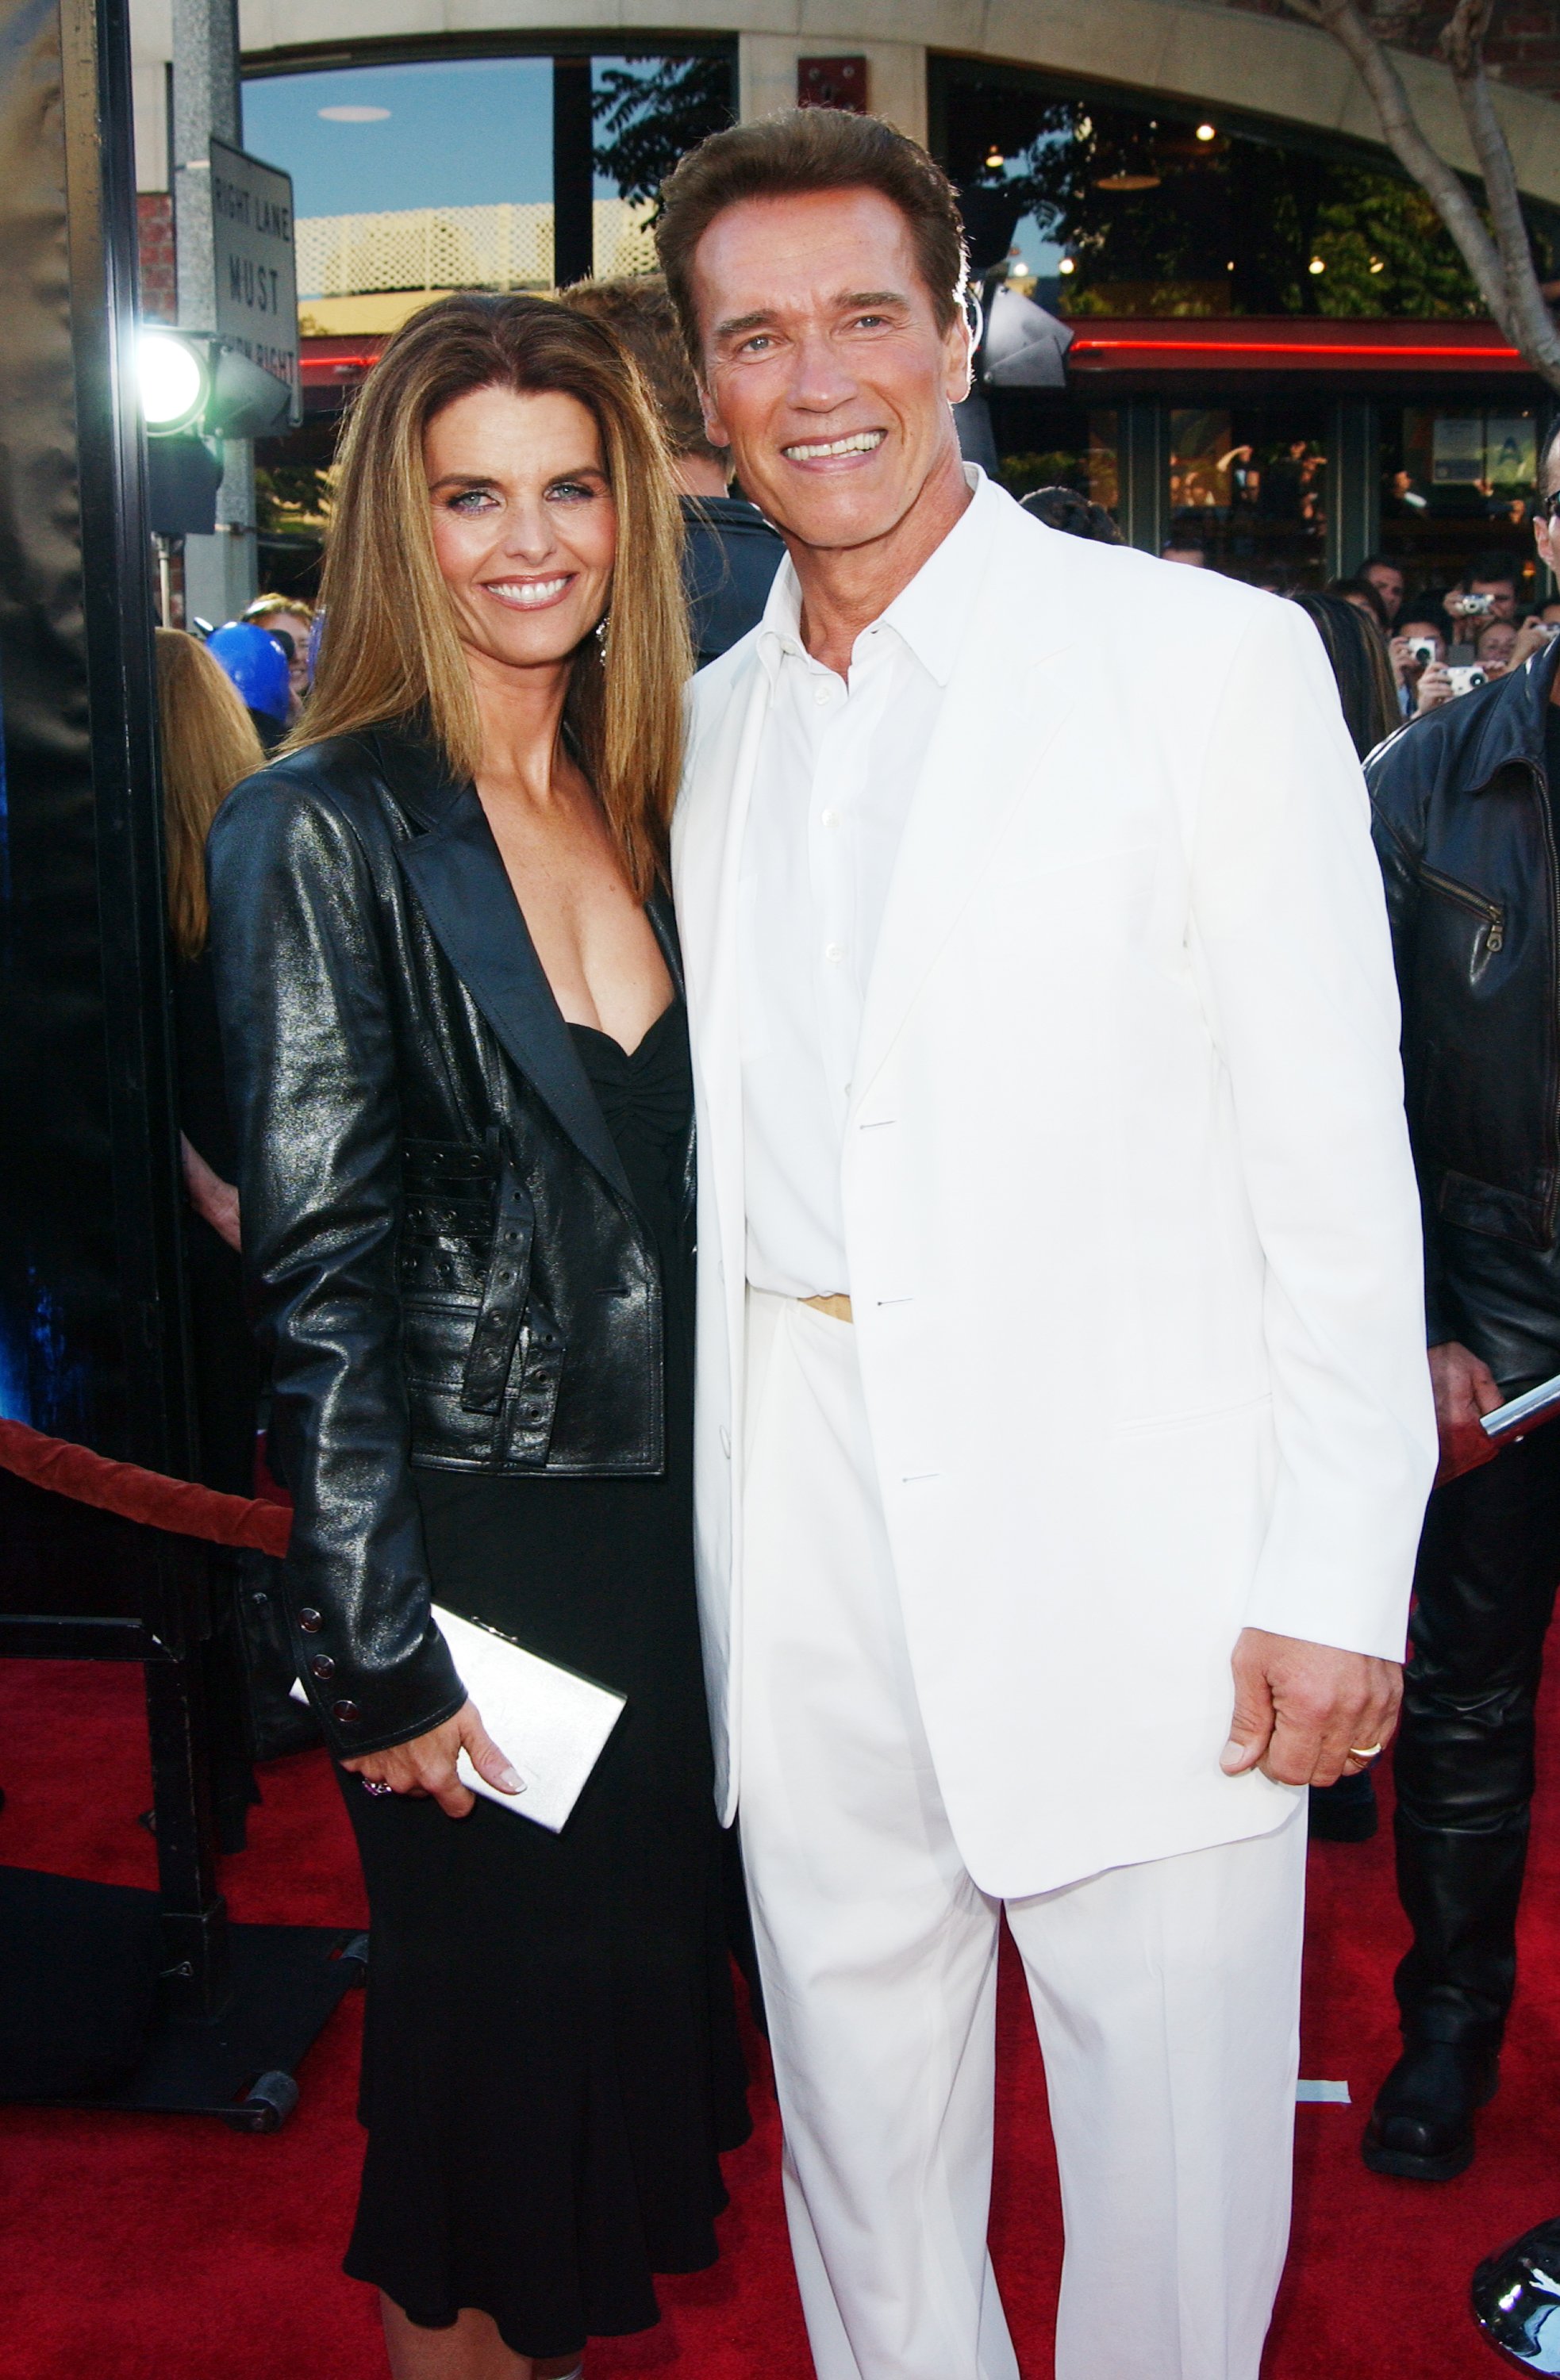 Actor Arnold Schwarzenegger and Maria Shriver at Mann Bruin in Los Angeles California | Source: Getty Images